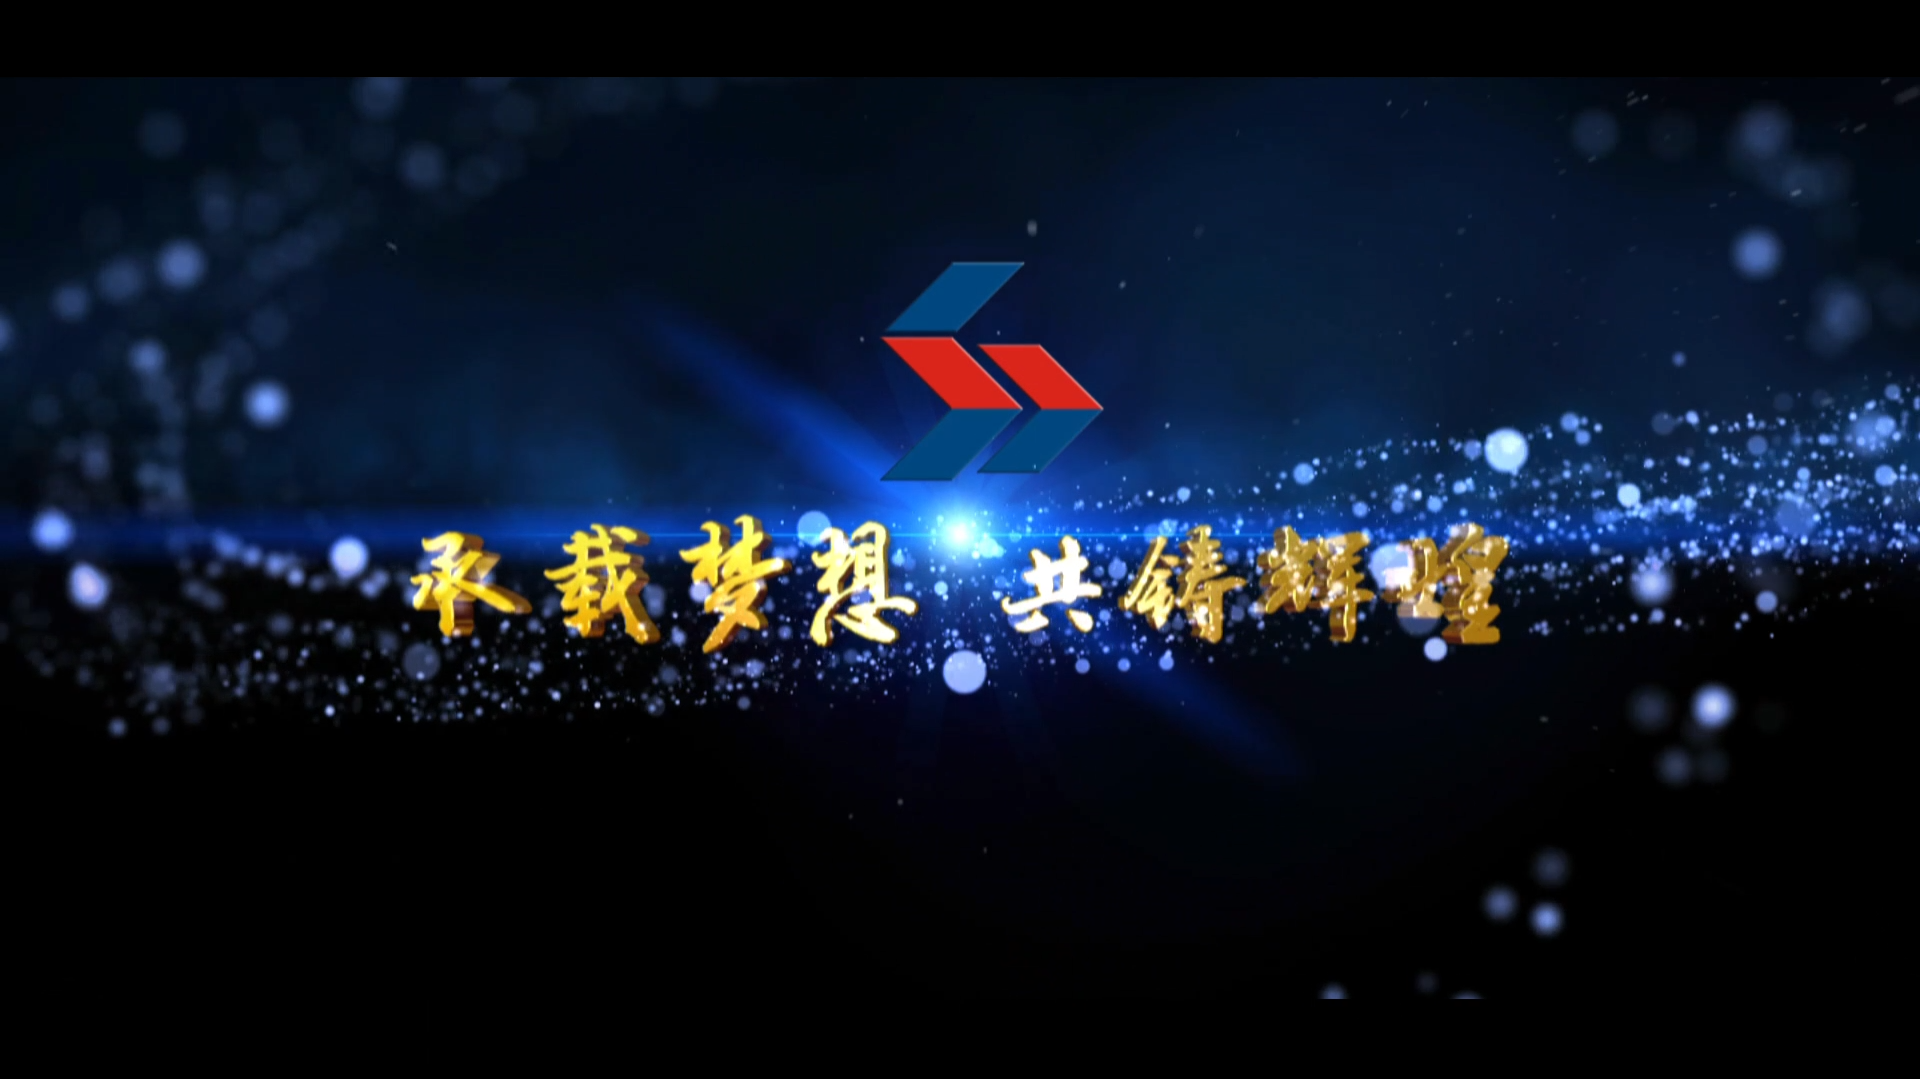 Shaanxi construction group promotional video